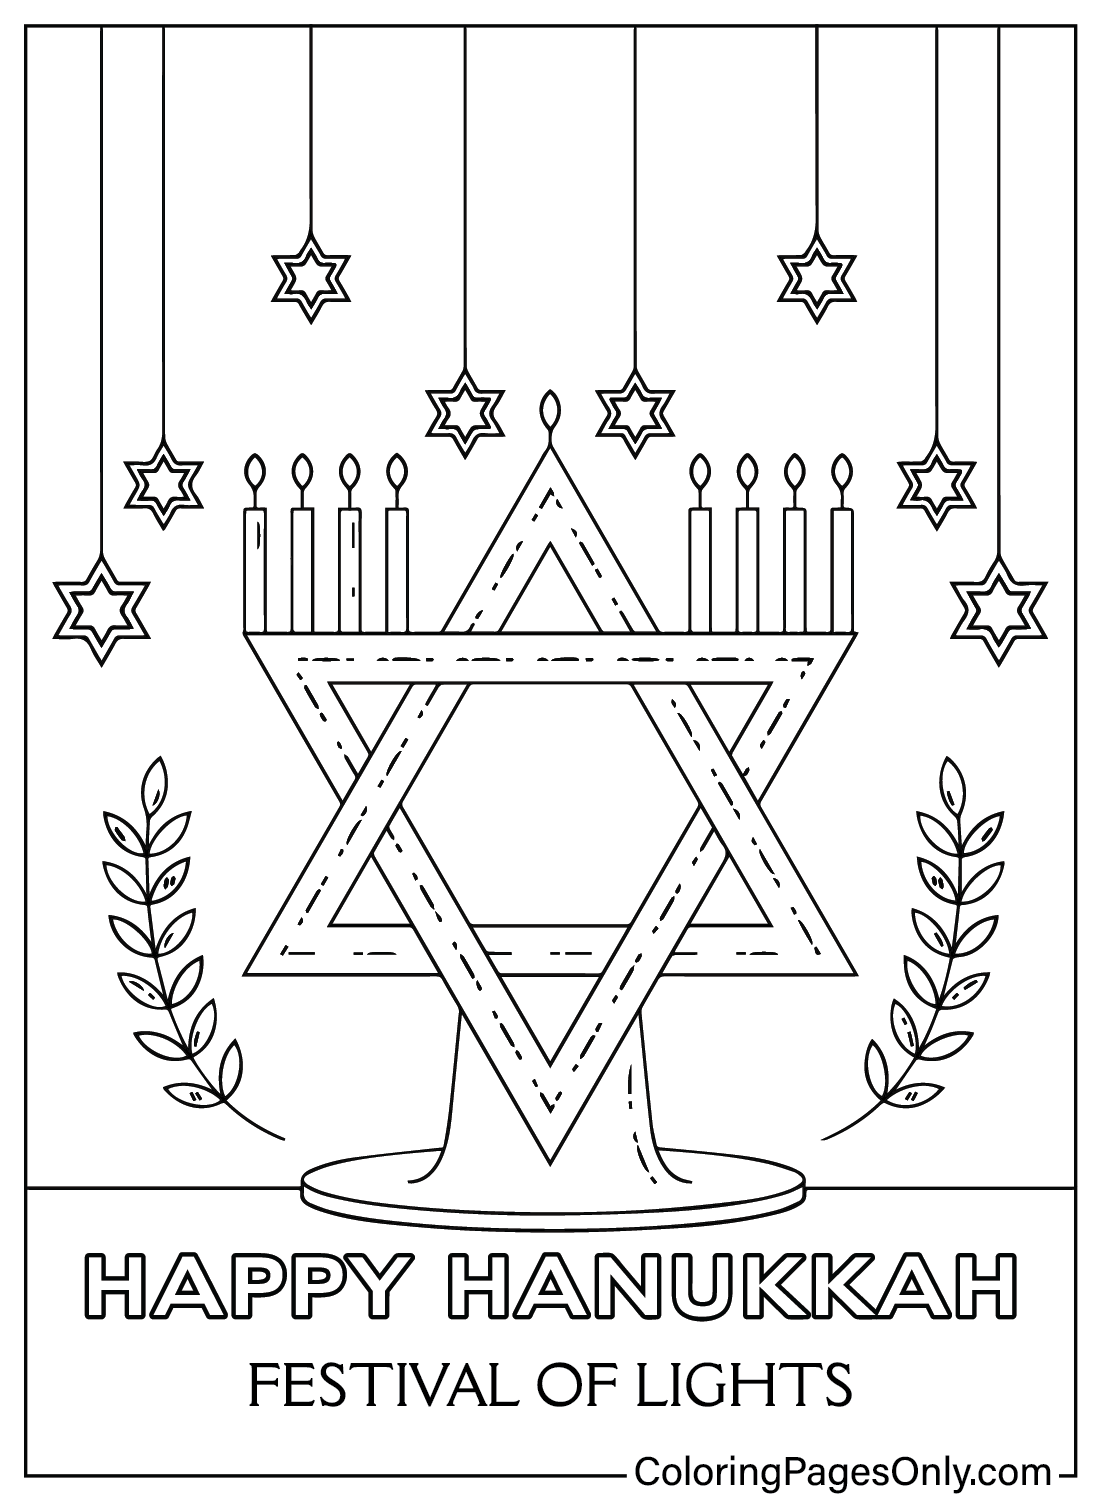 Hanukkah Coloring Page for Adults from Hanukkah